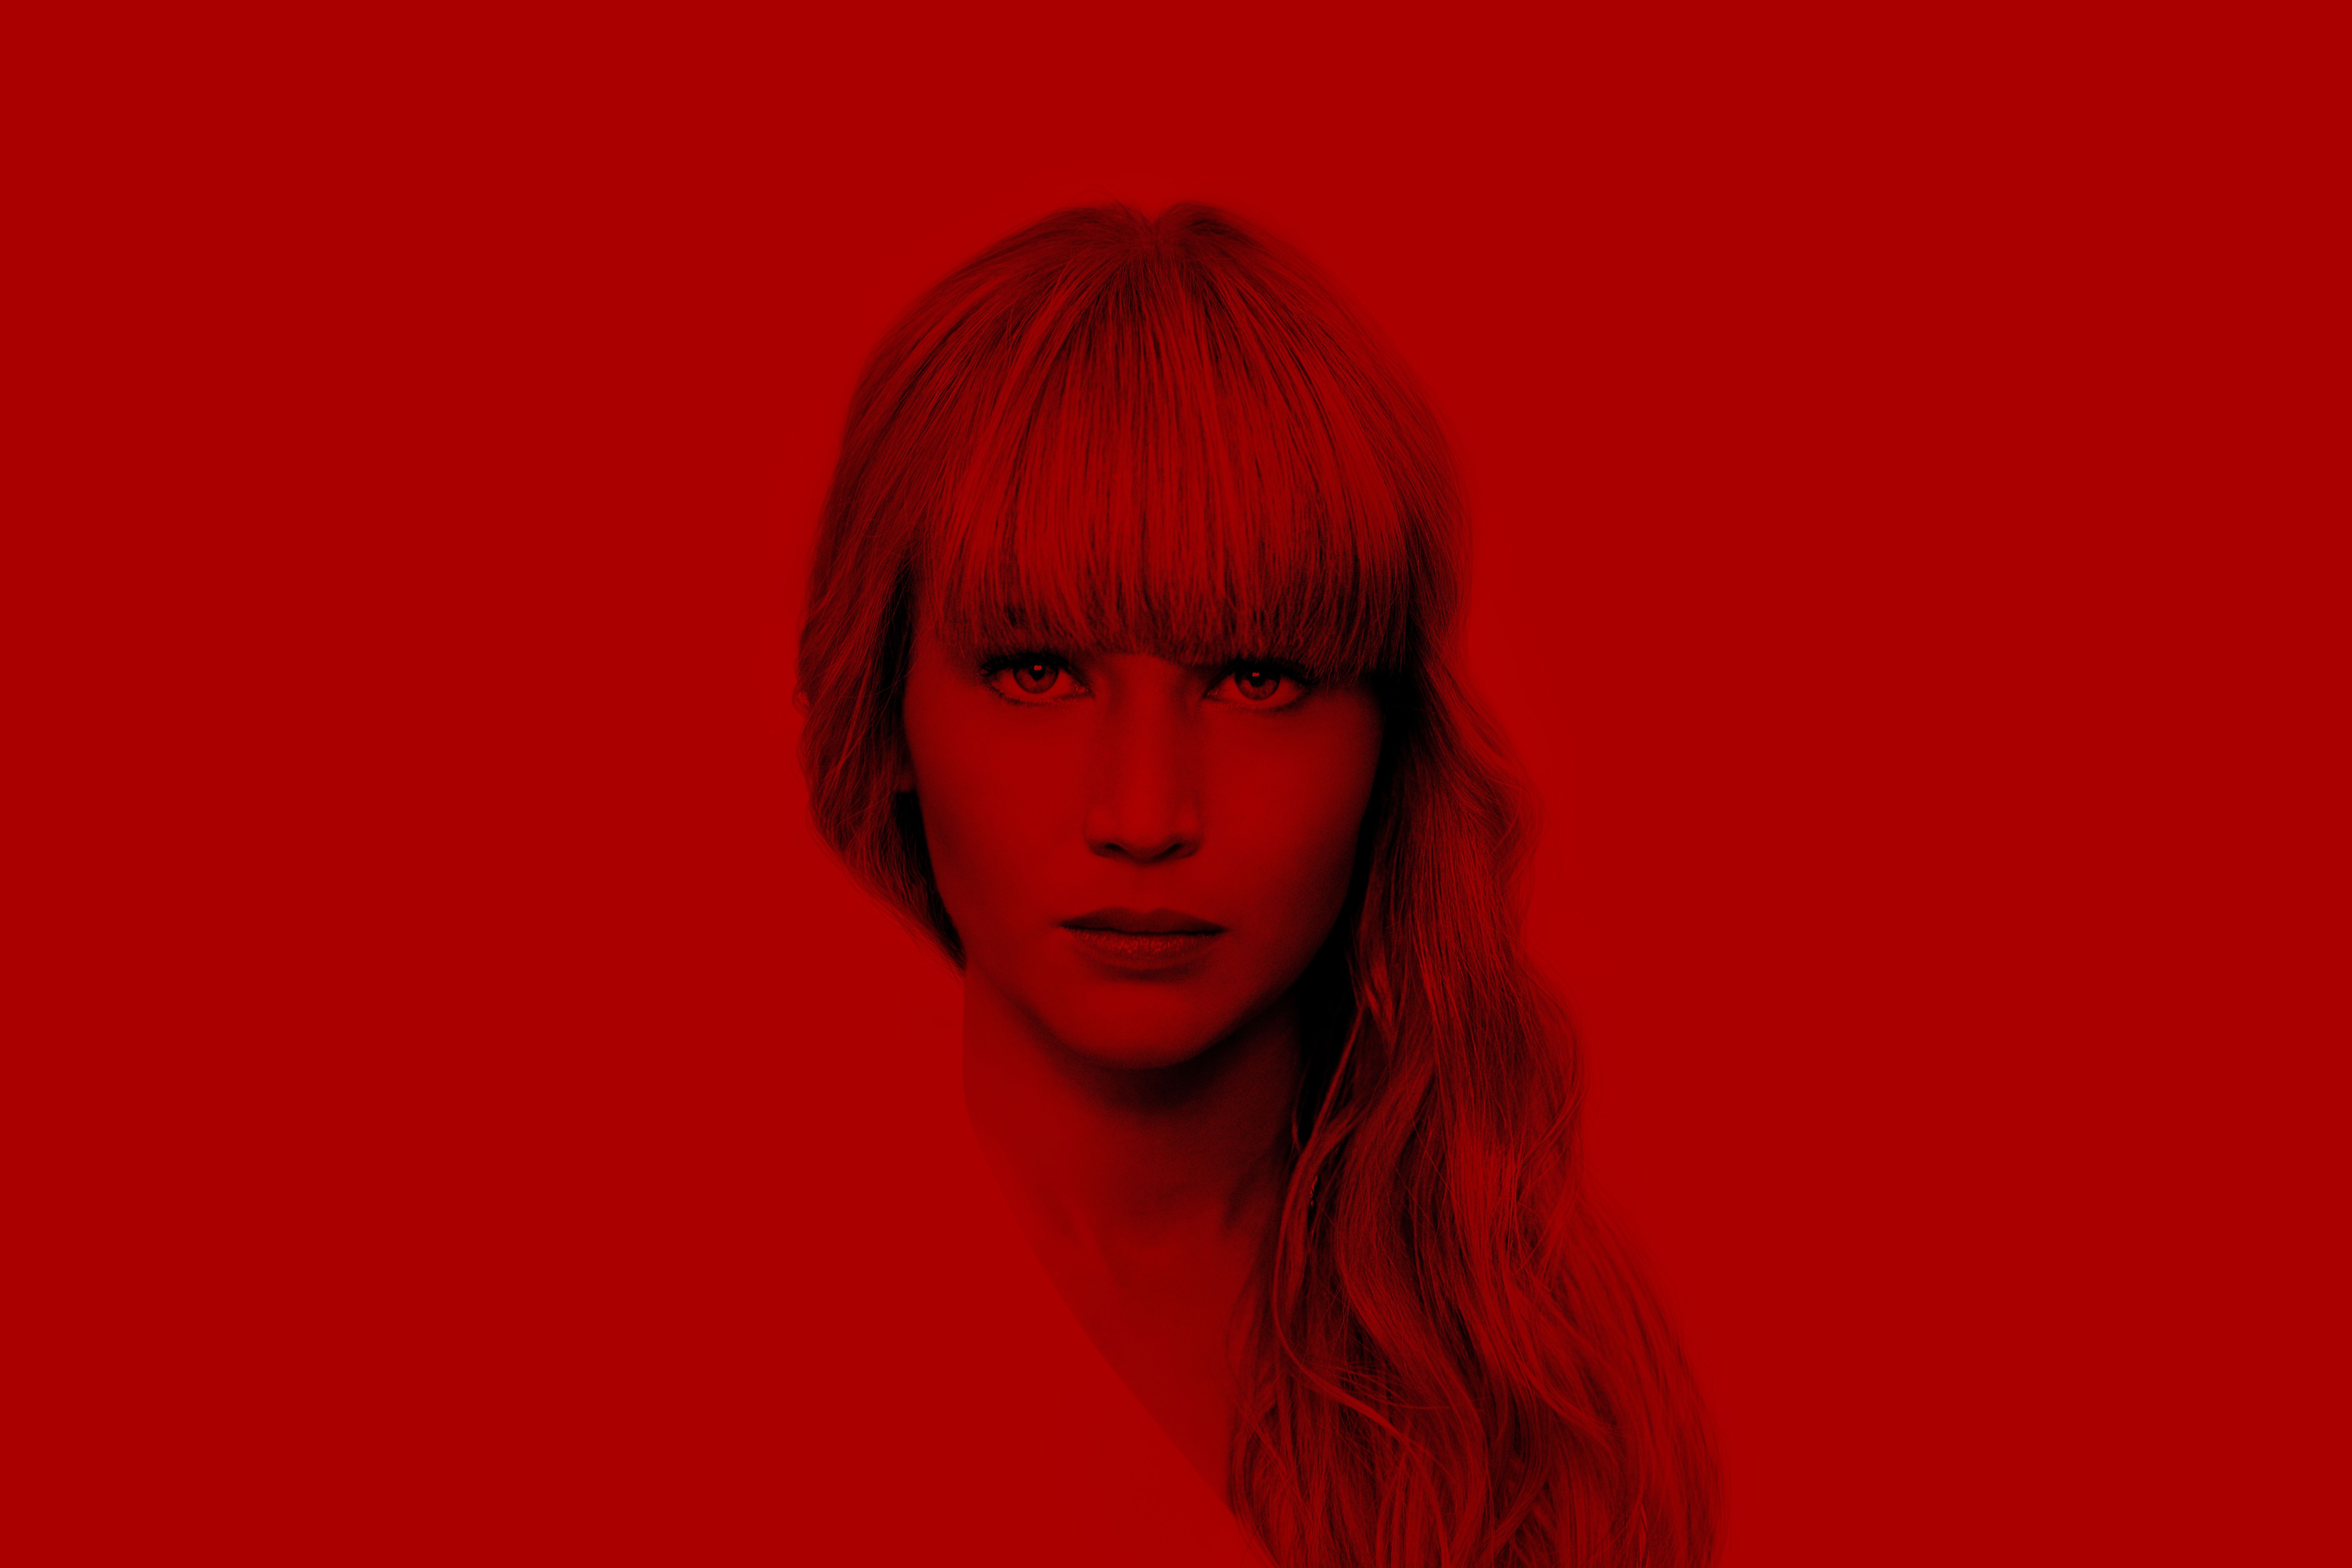 Red Sparrow Jennifer Lawrence Movie 2018 Wallpapers